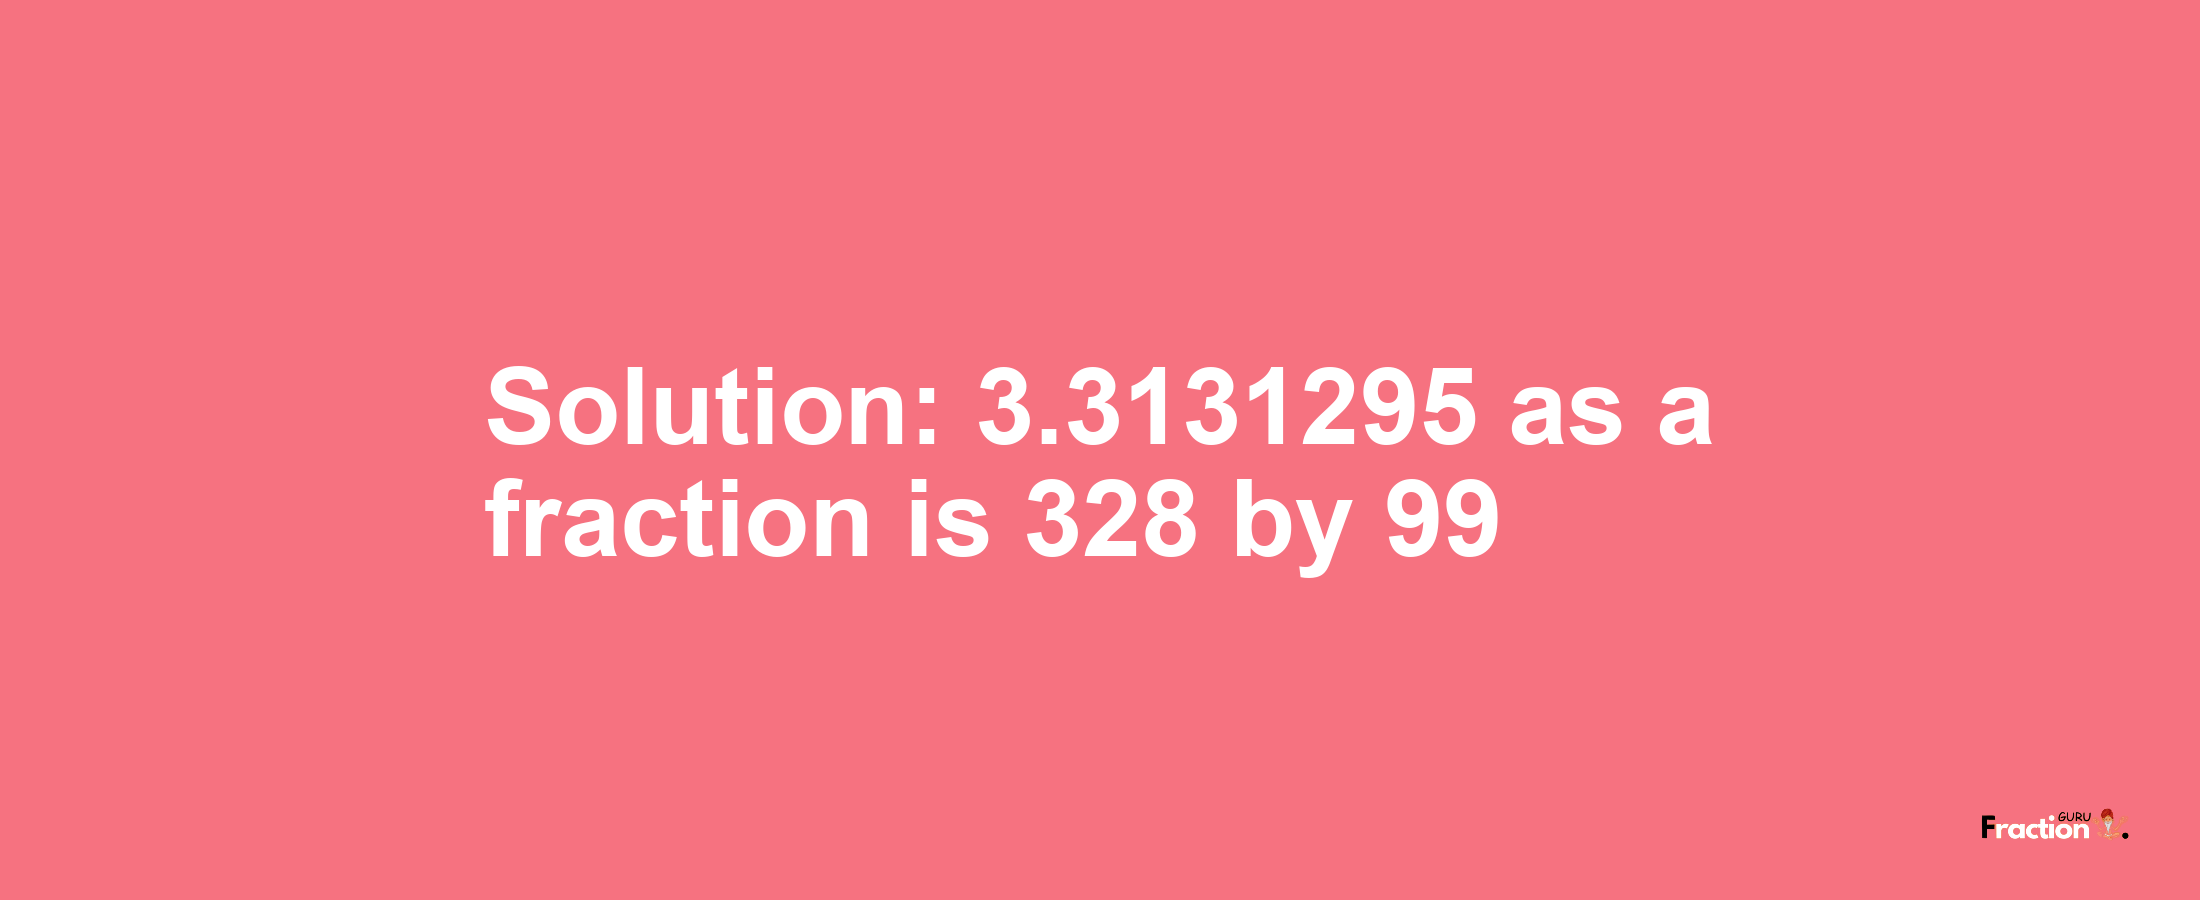 Solution:3.3131295 as a fraction is 328/99